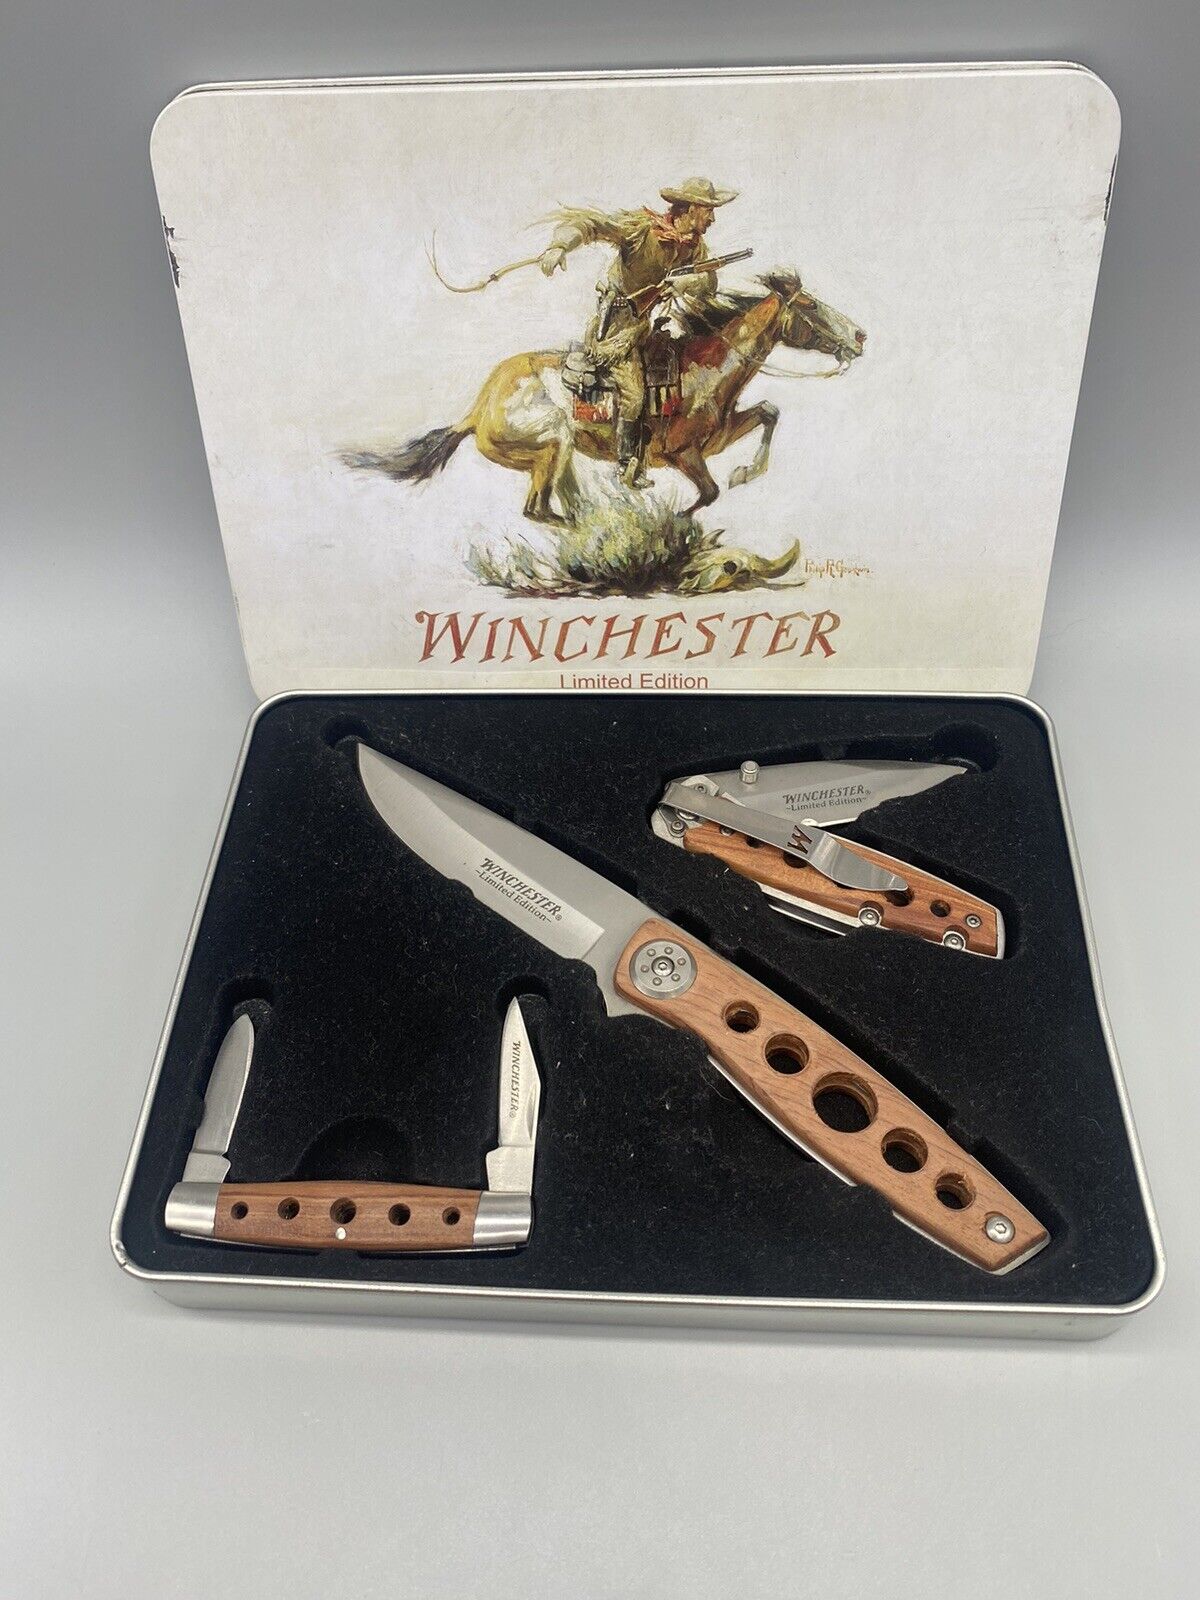 WINCHESTER Limited Edition 3 Knife Set In Tin Case 